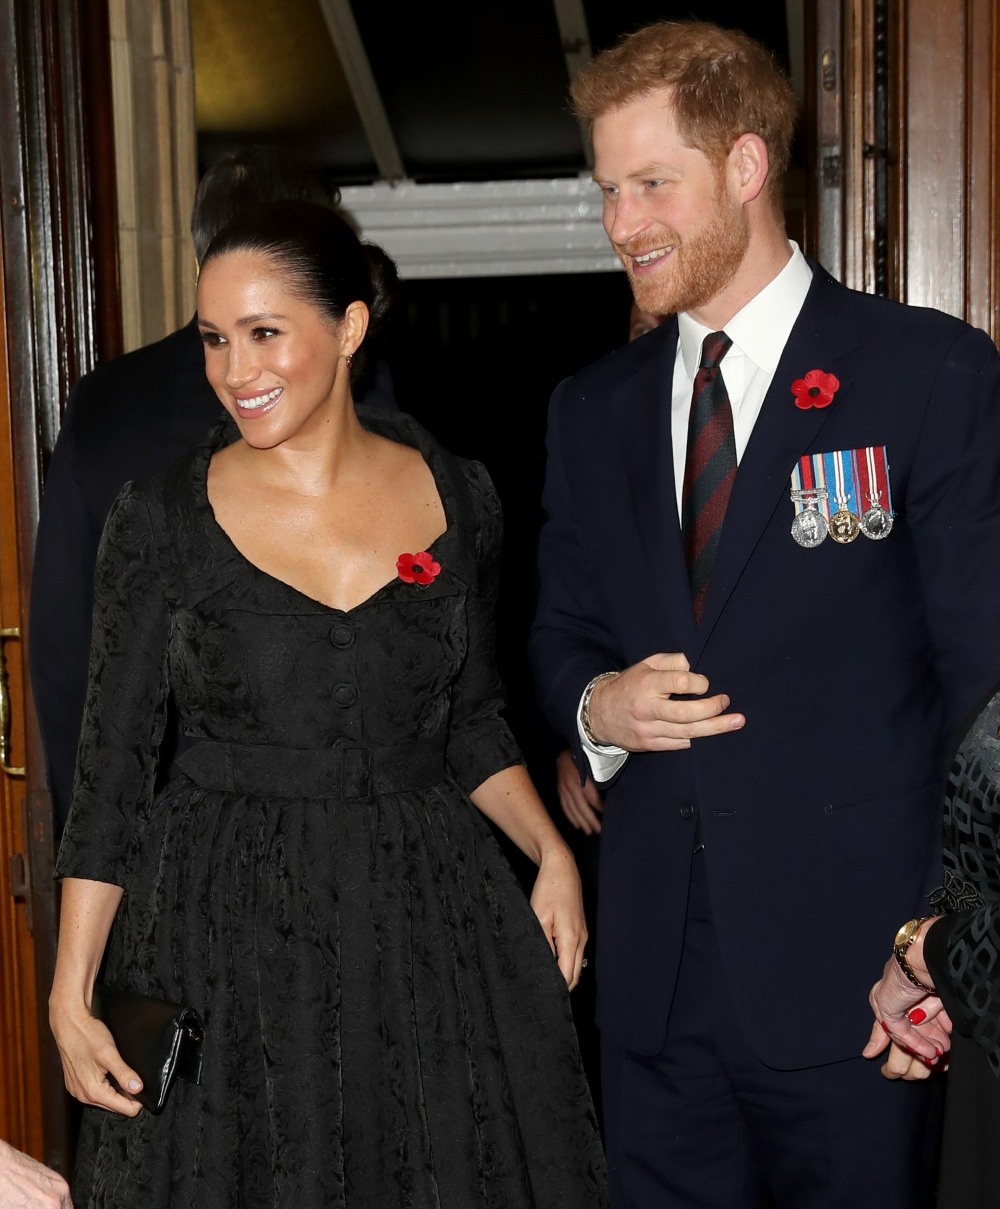 Meghan, Duchess of Sussex and Prince Harry, Duke of Sussex attend the annual Royal British Legion Festival of Remembrance at the Royal Albert Hall on November 09, 2019 in London, England.